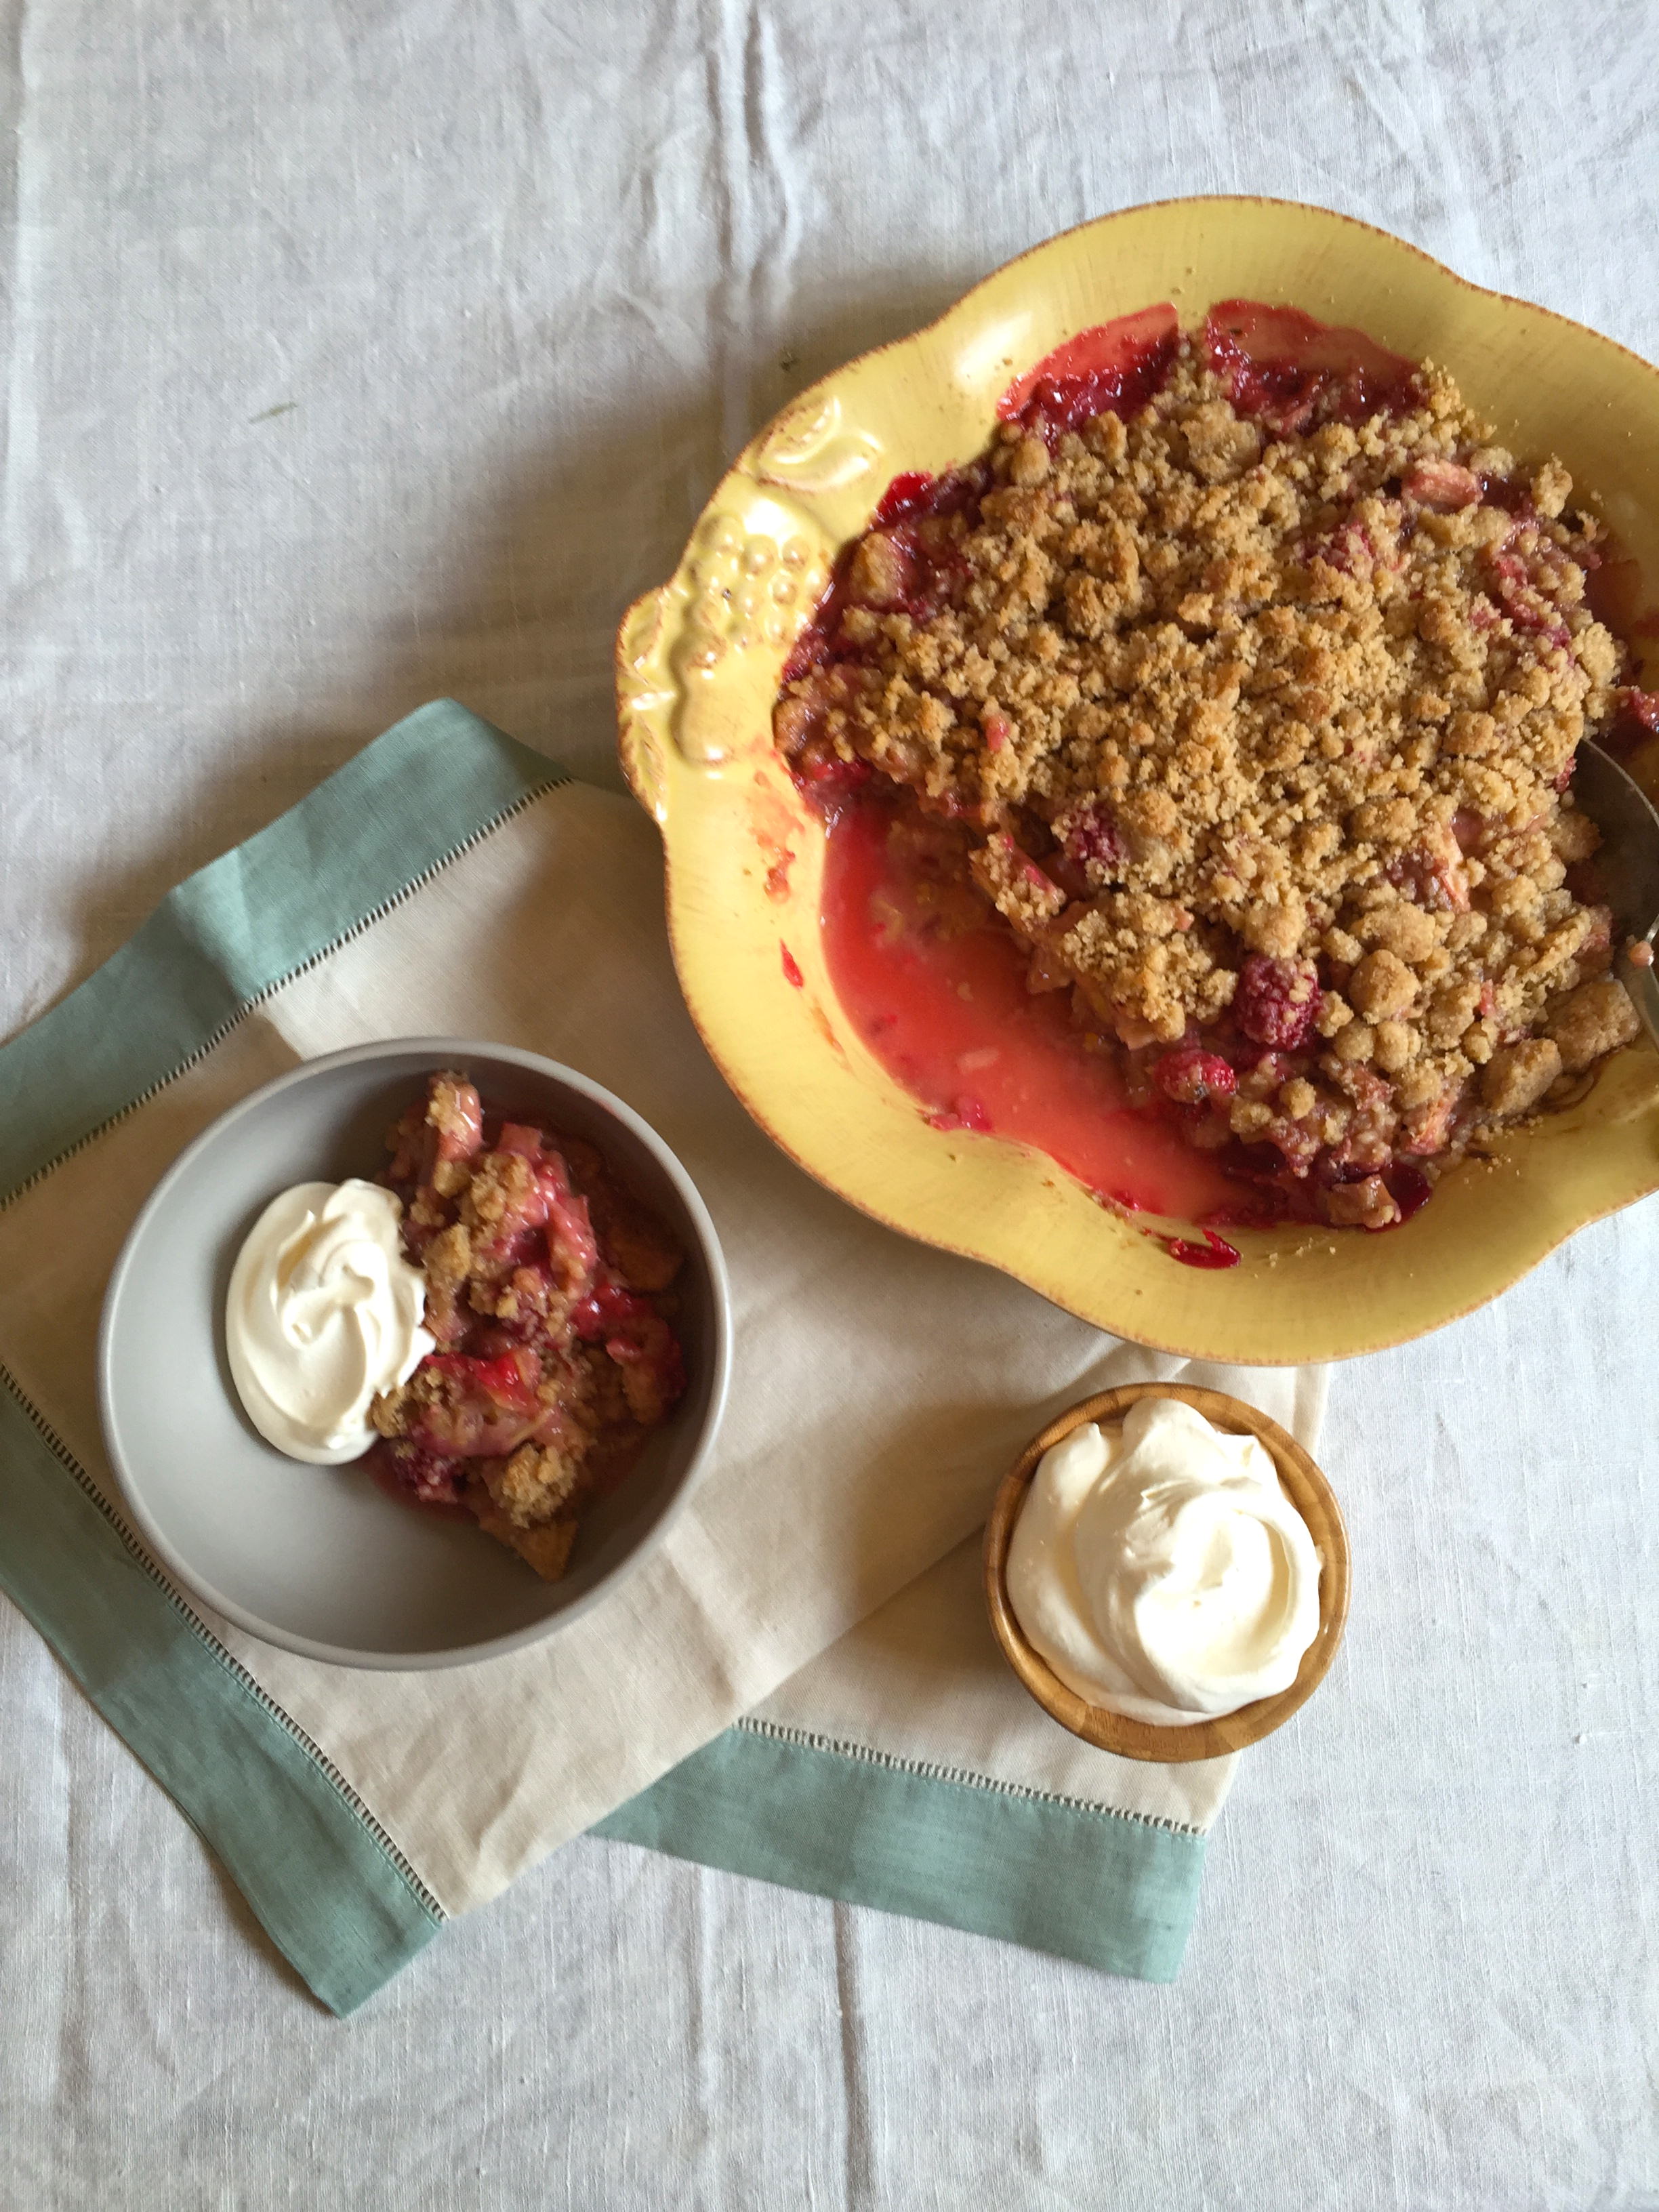 a yellow baking dish of Raspberry Rhubarb Crisp, and some in a bowl next to it with shipped cream on top. A small bowl of whipped cream sits beside it. 